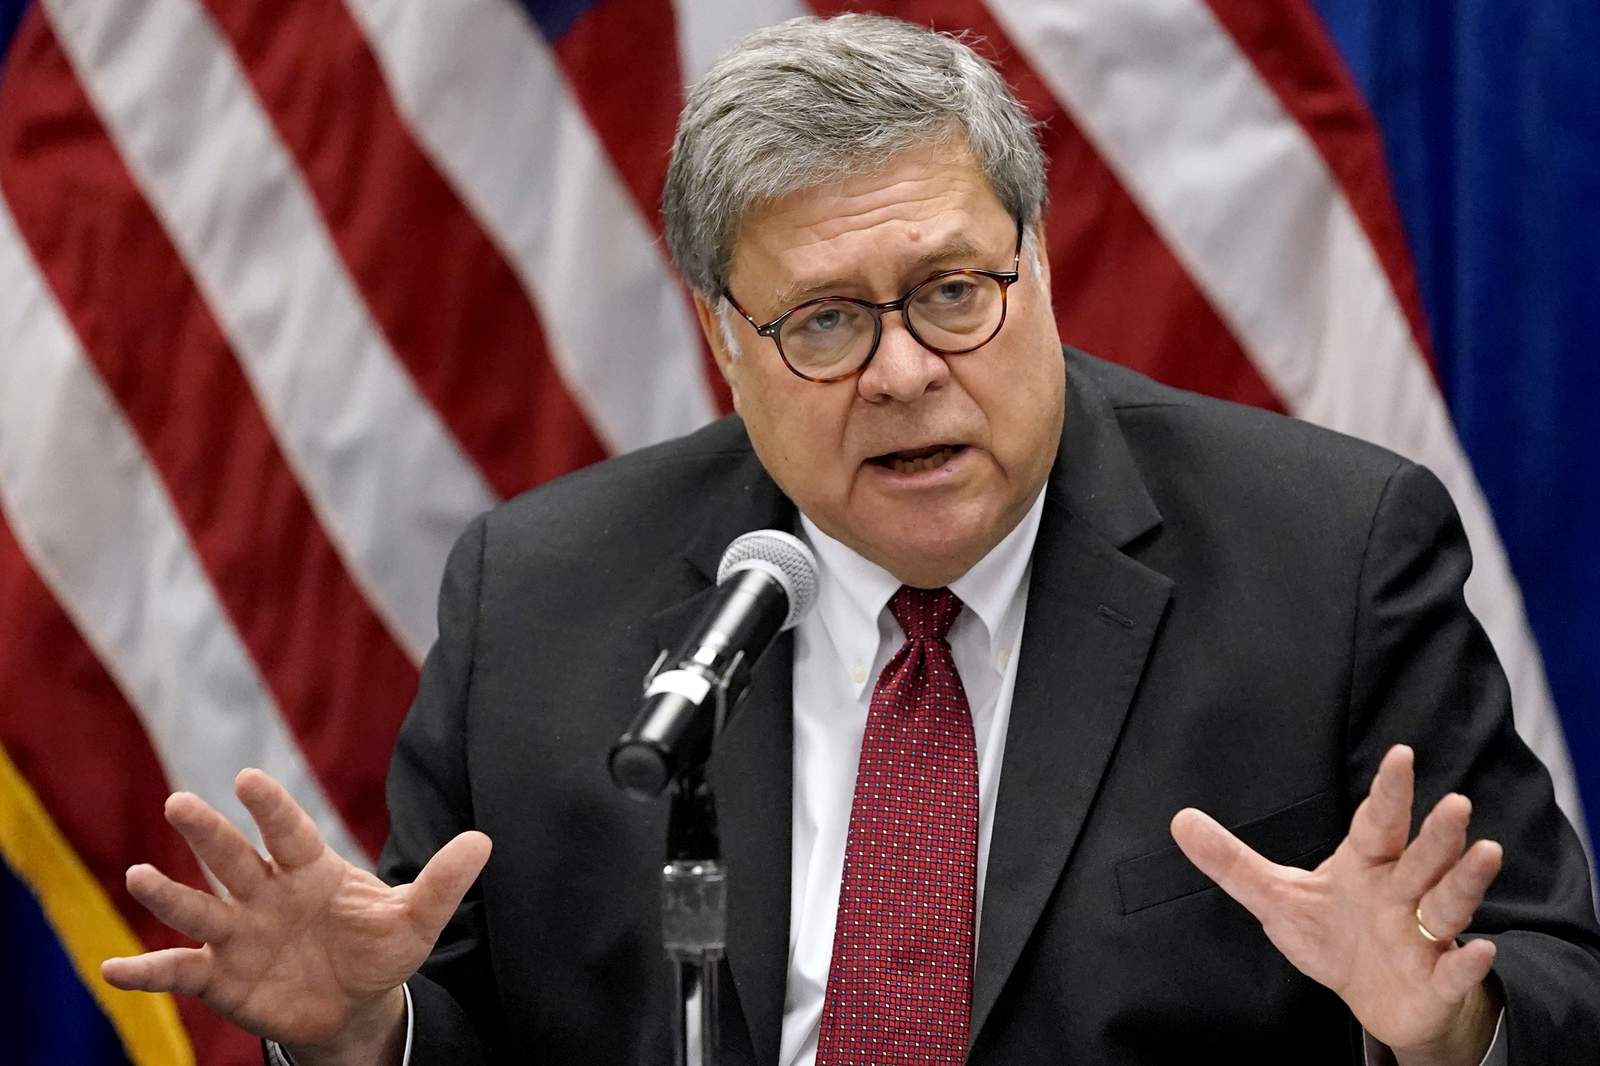 No evidence of fraud that’d change presidential election outcome, AG William Barr says